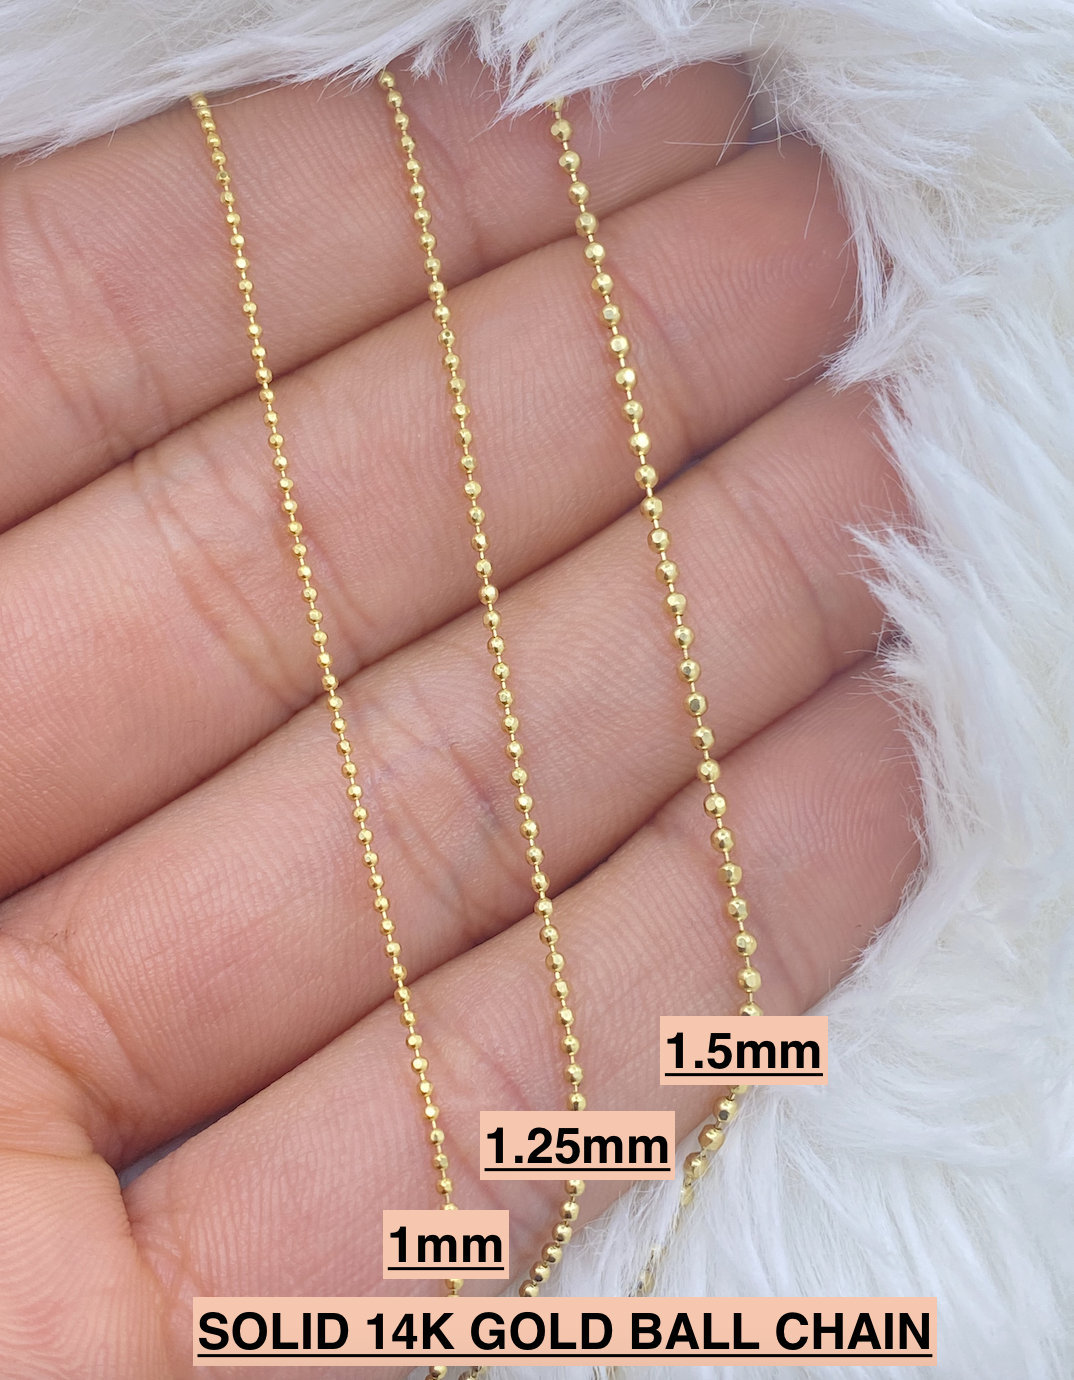 14k Yellow Gold 1.2mm Diamond-Cut Baby Ball Chain Necklace with Secure Lo 